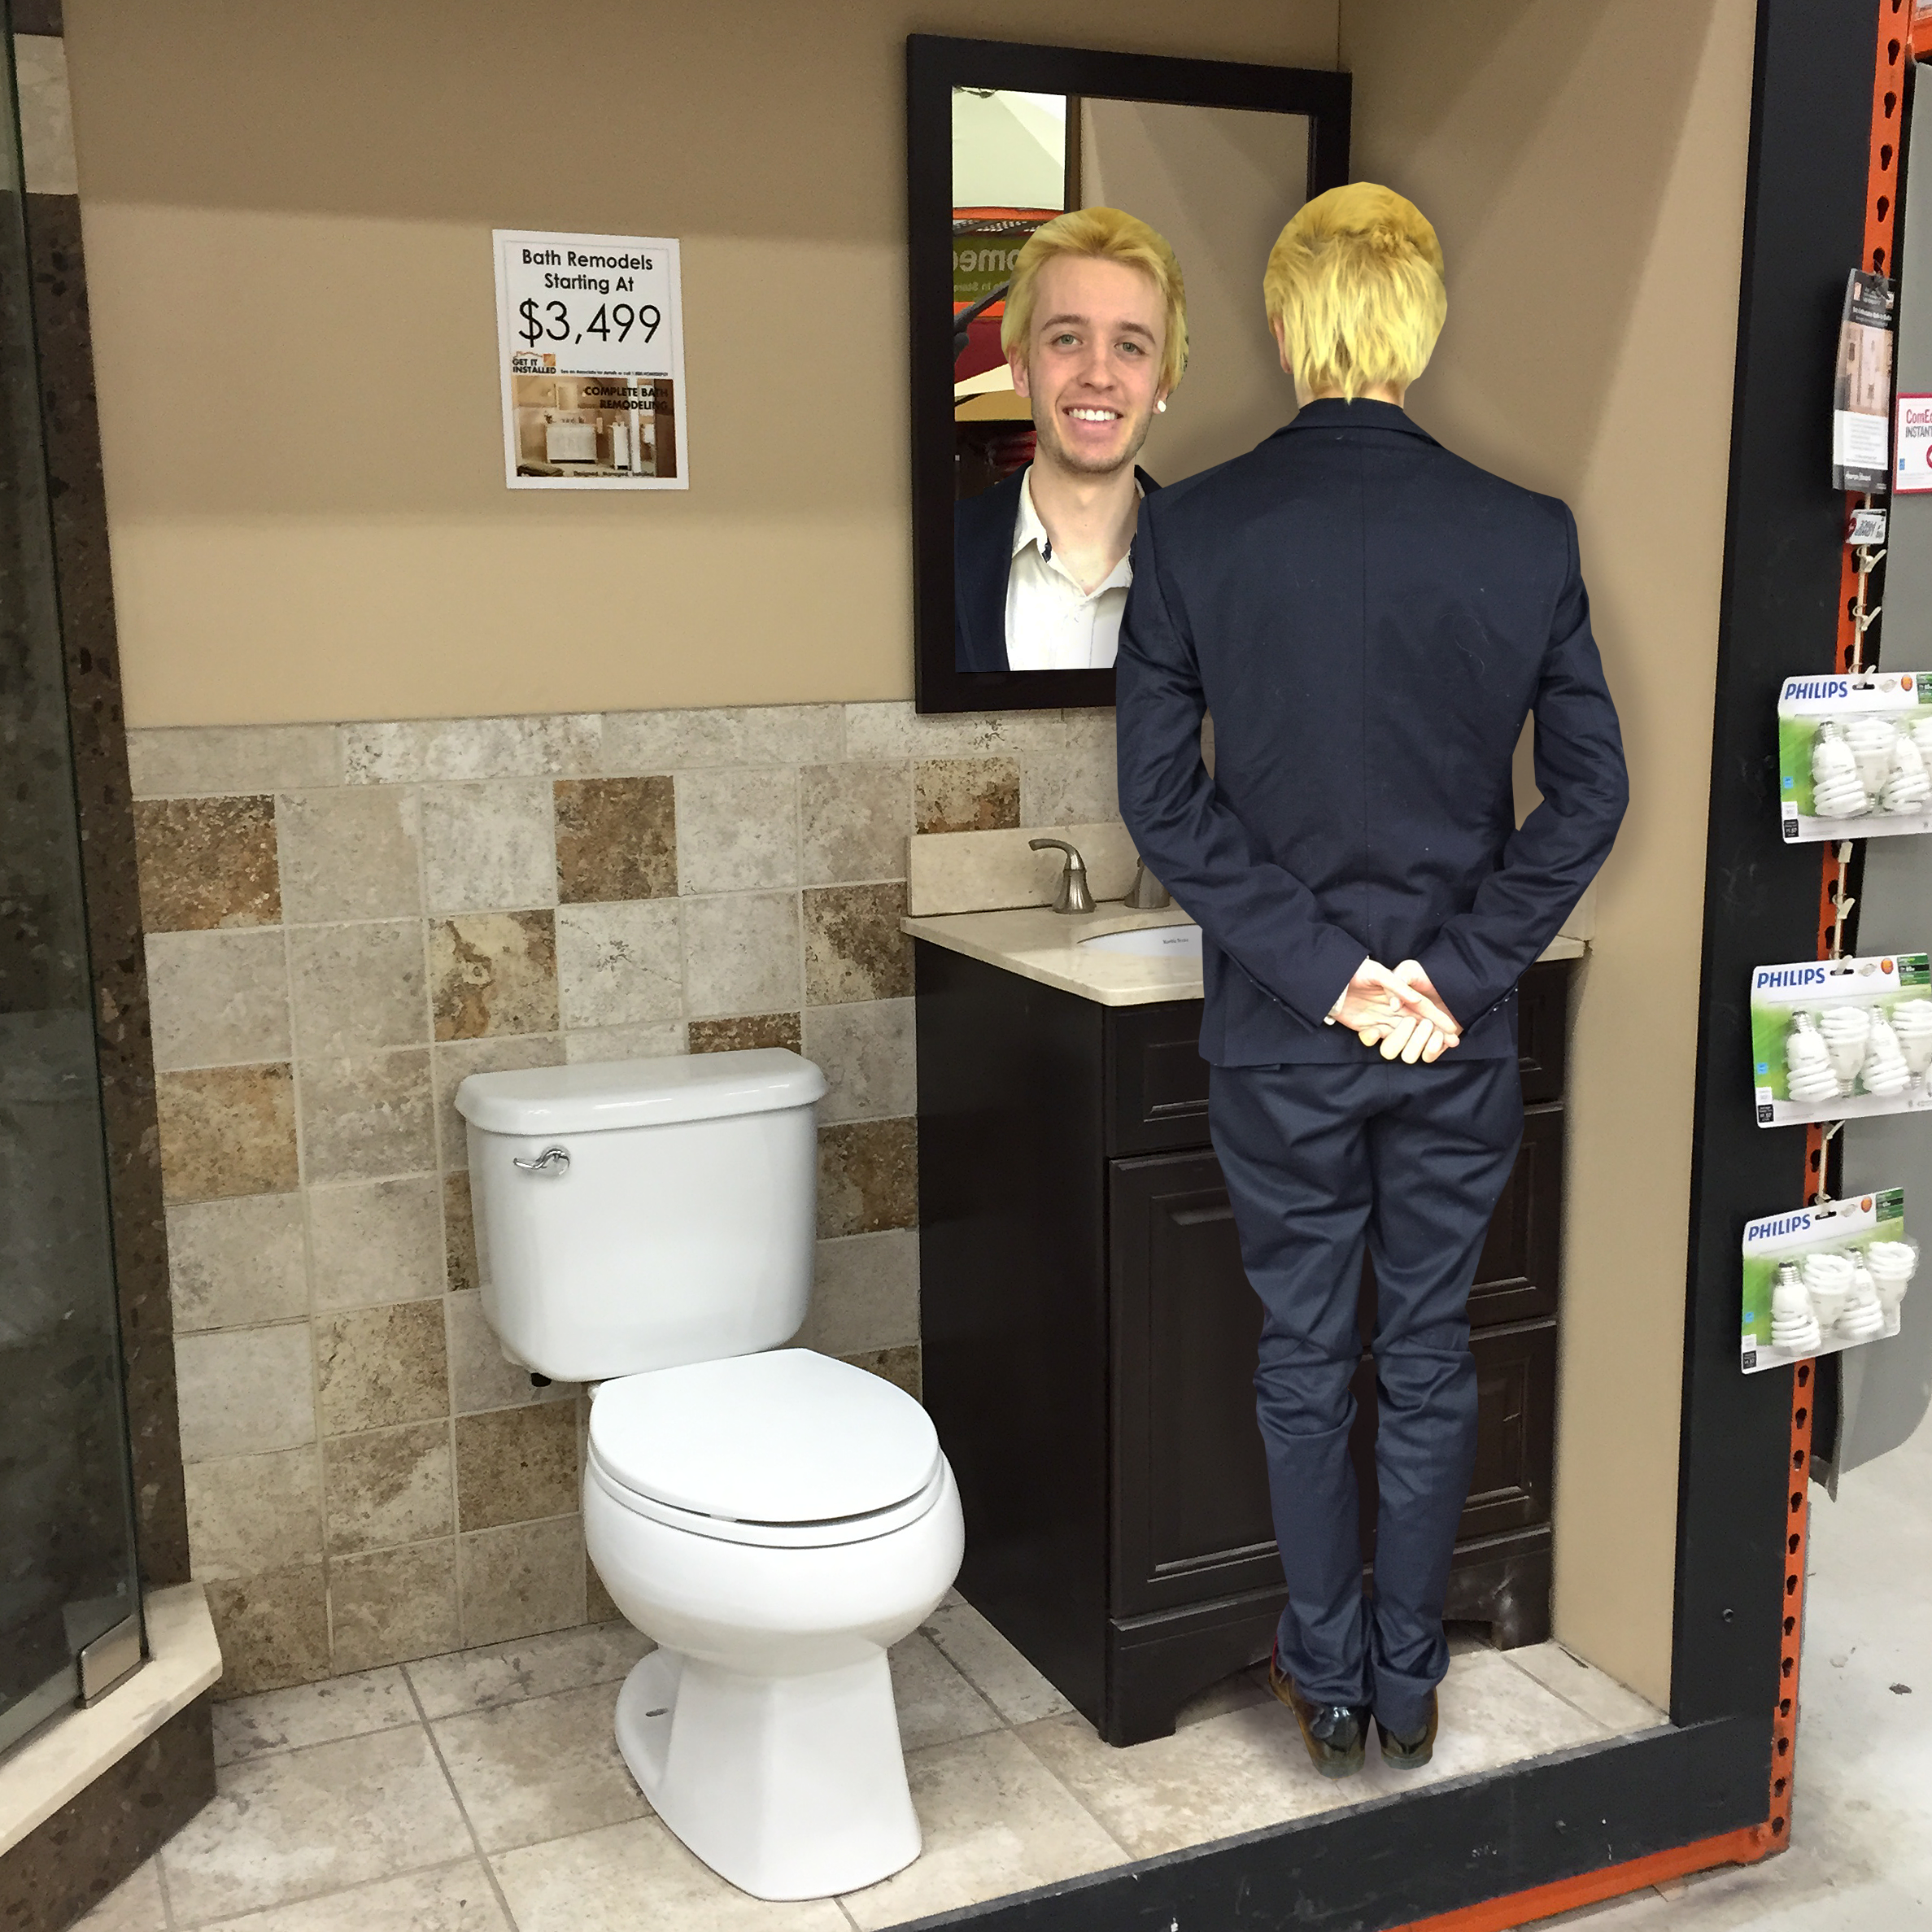 Butler facing away from the camera standing in a Home Depot bathroom display